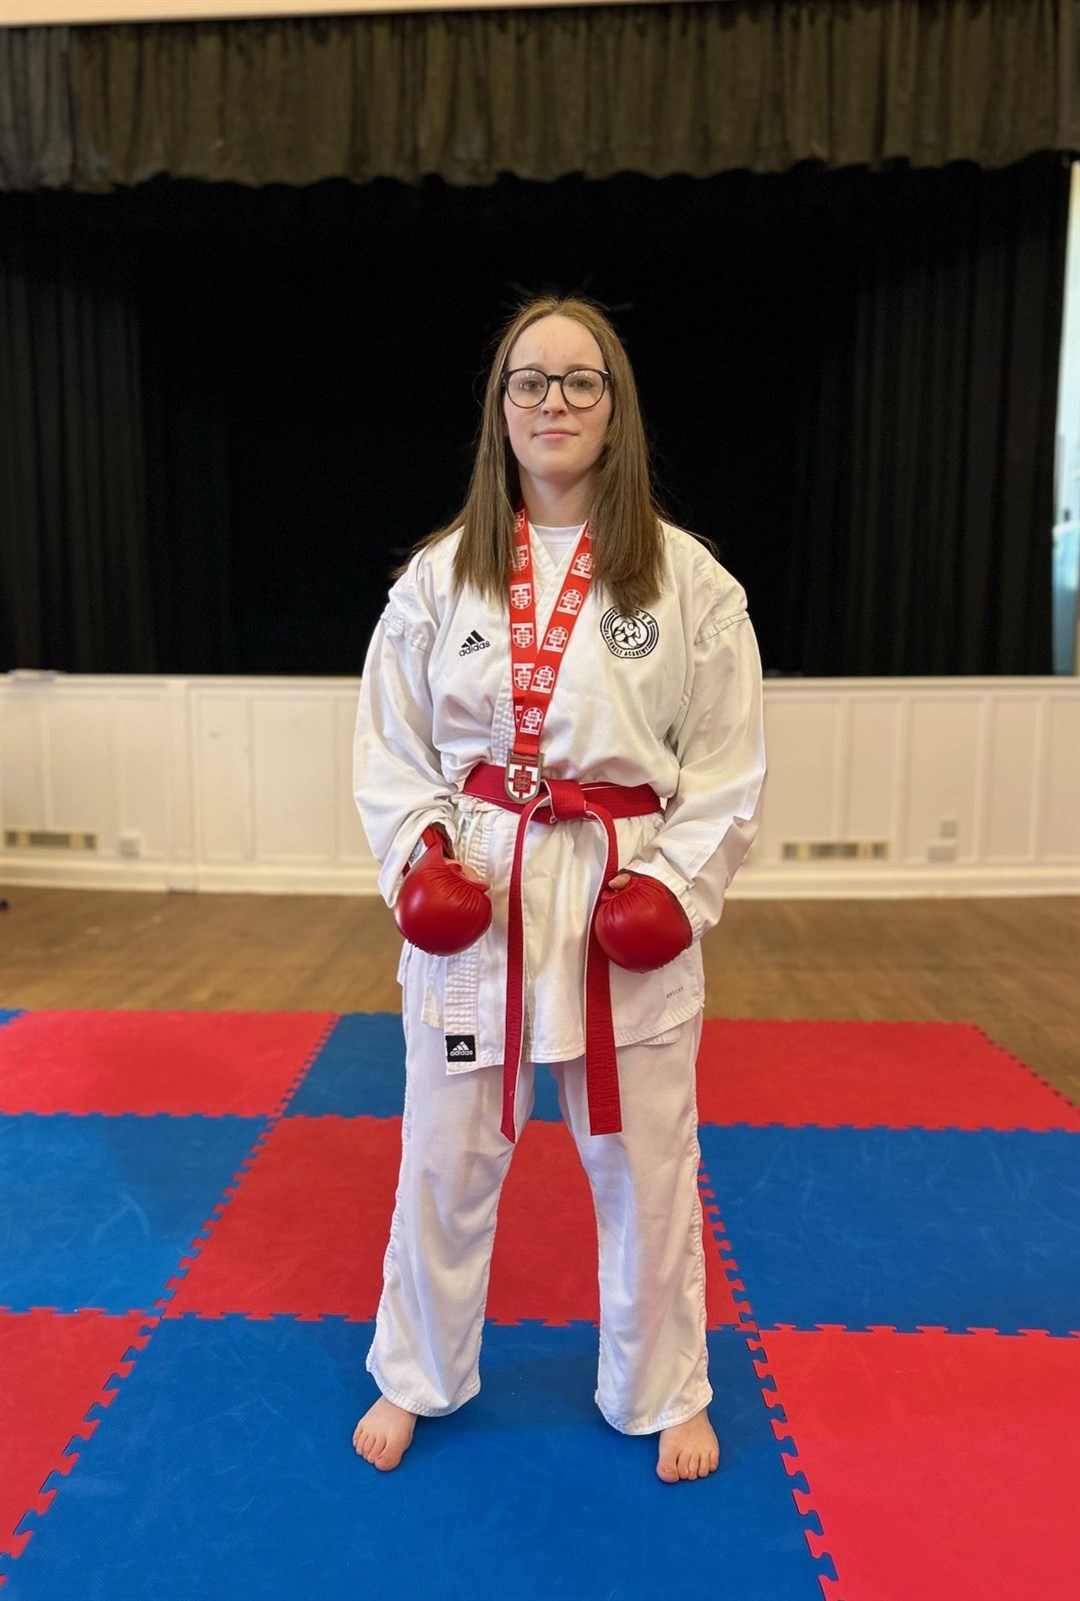 Robyn Collier (13) picked up a silver medal at the English Karate Championships in Essex.